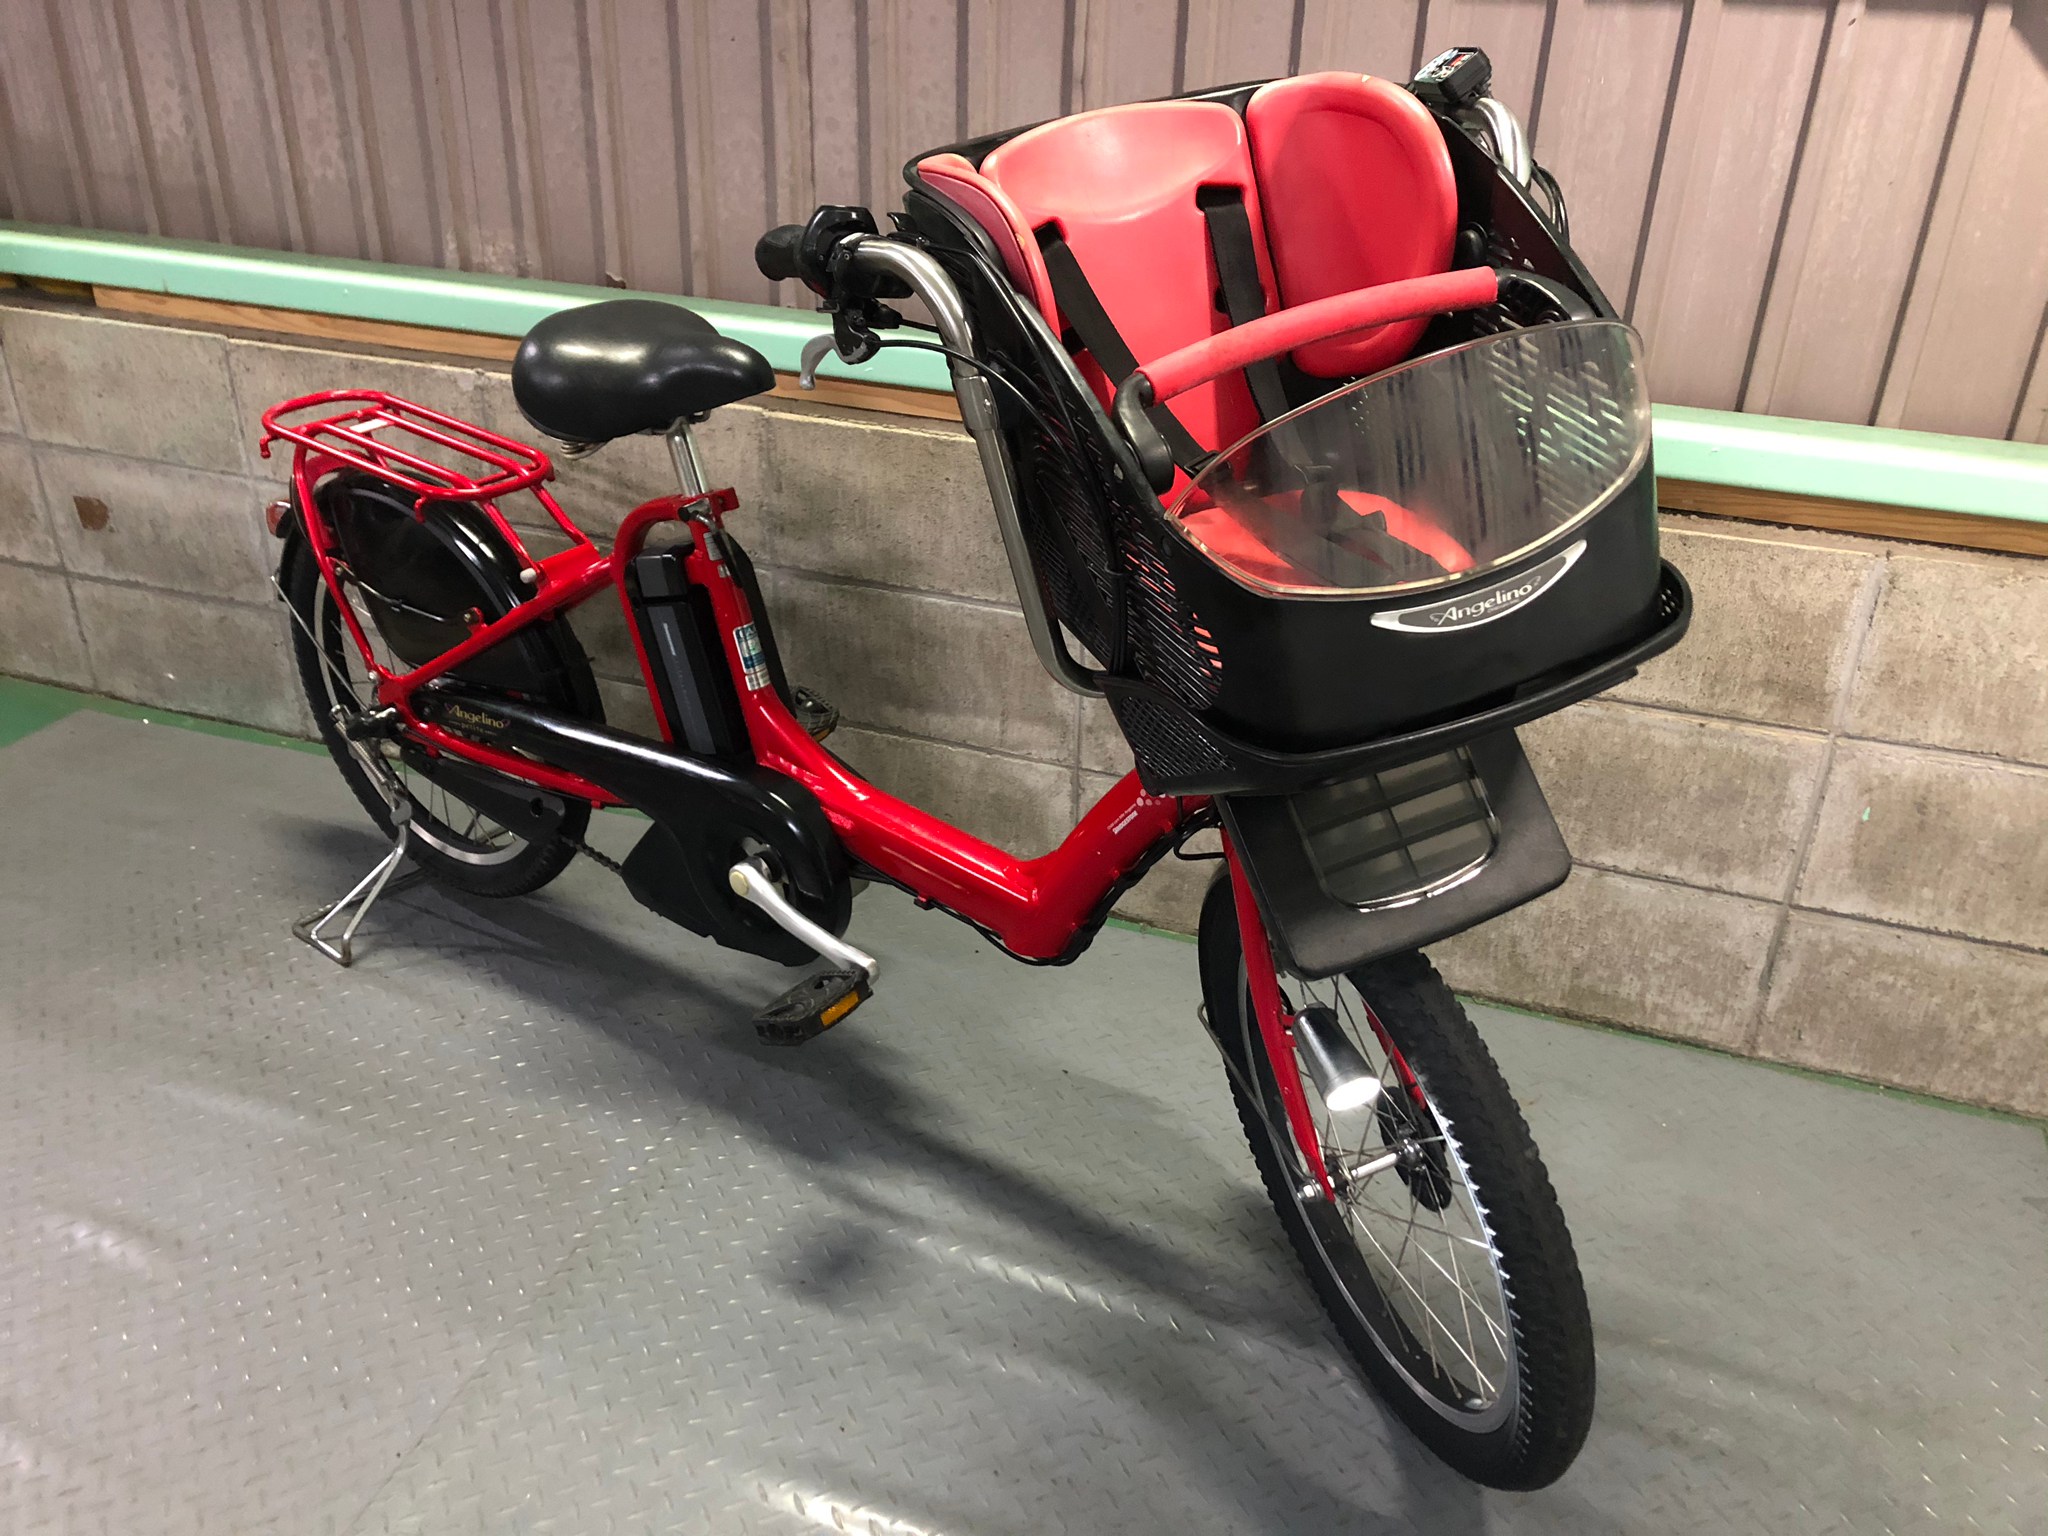 SOLD OUT】電動自転車 ブリヂストン アンジェリーノ 20インチ 子供乗せ 